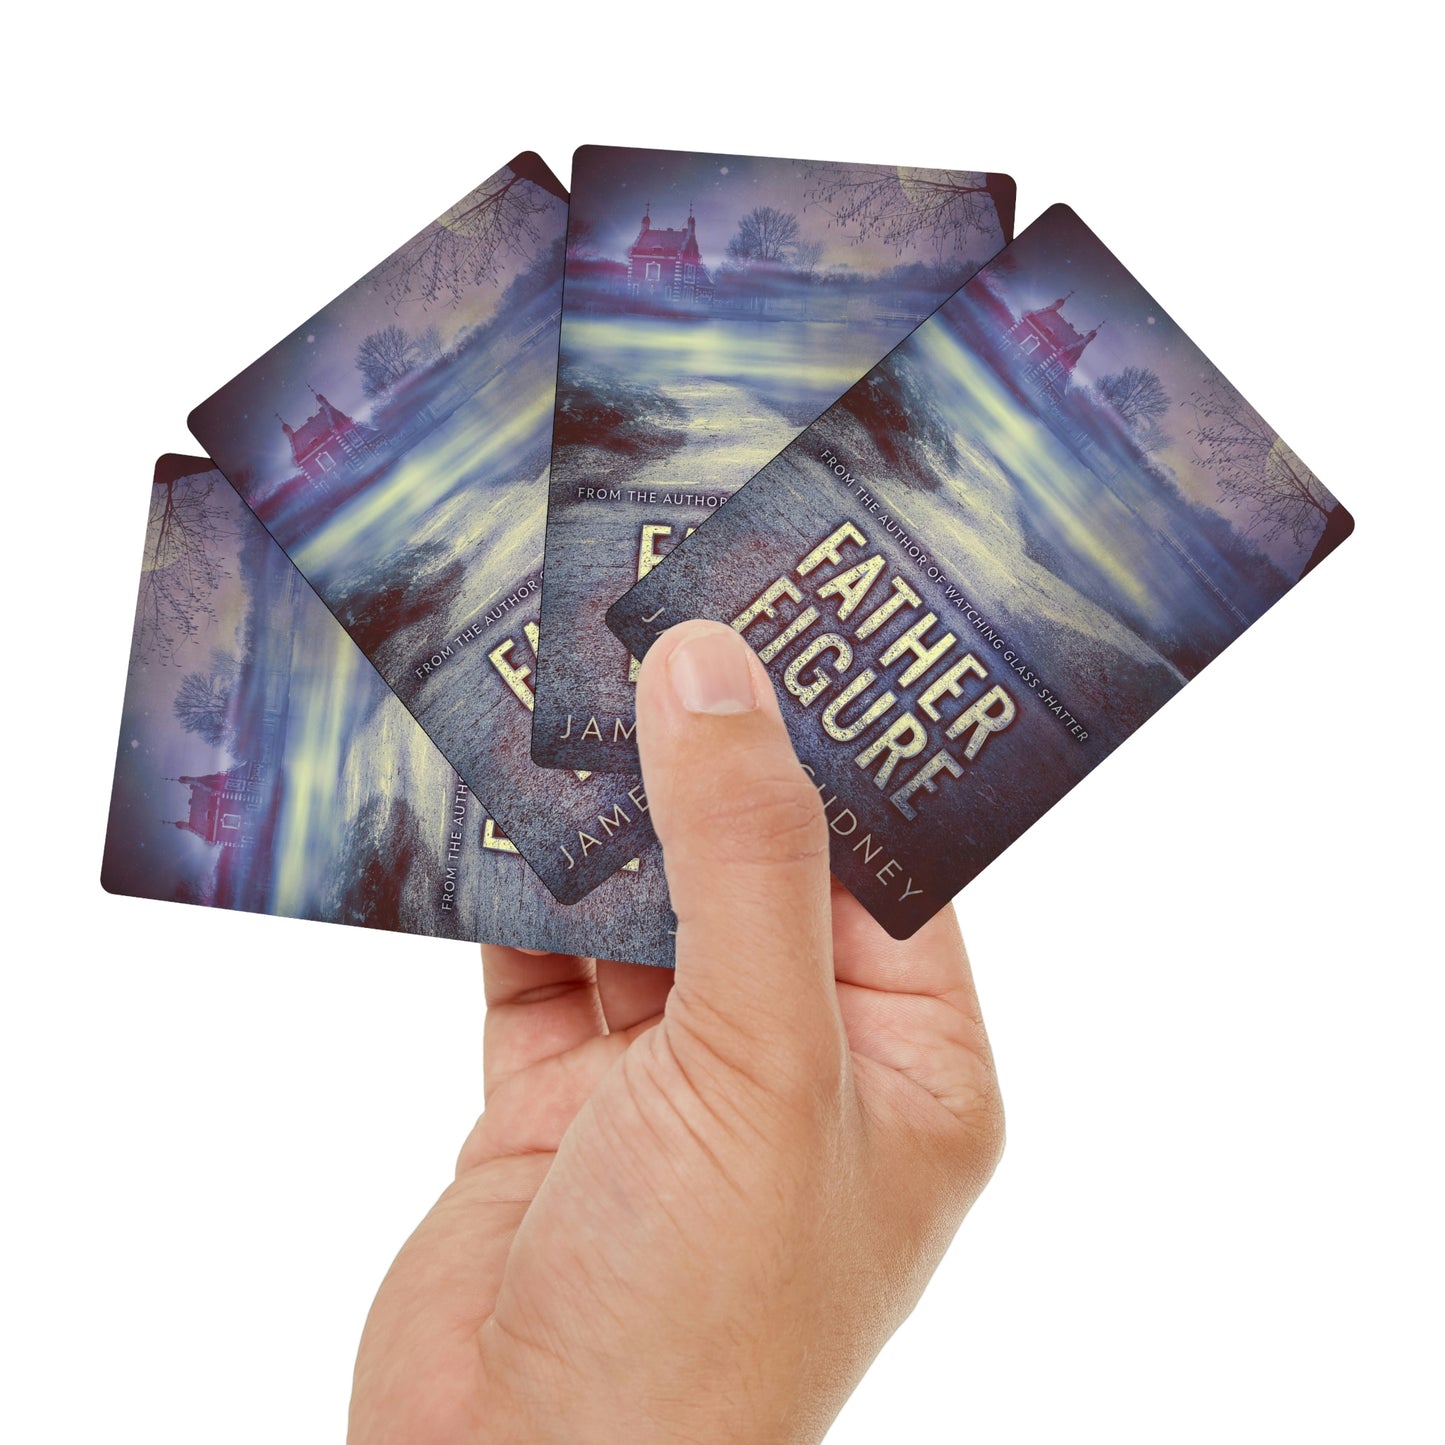 Father Figure - Playing Cards